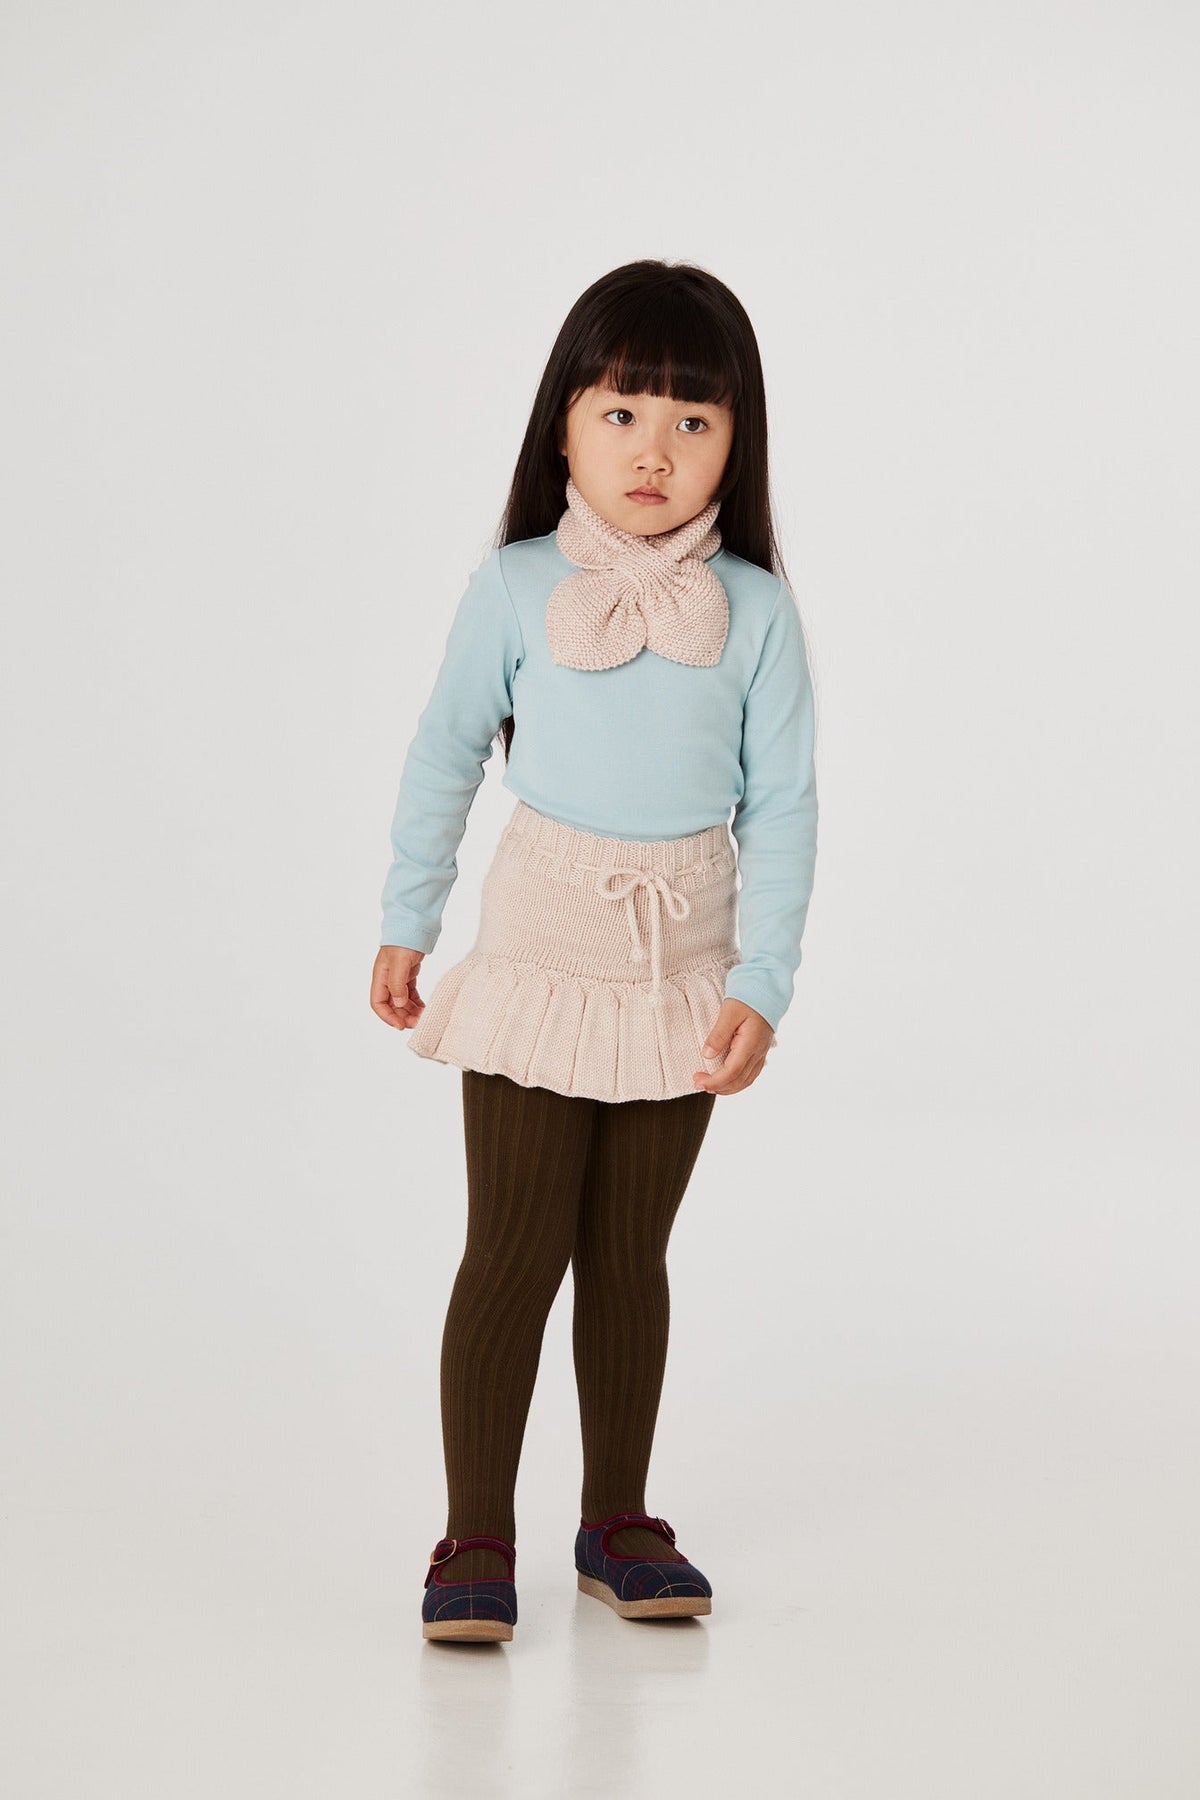 Skating Pond Skirt - Dune+Model is 41 inches tall, 38lbs, wearing a size 4-5y